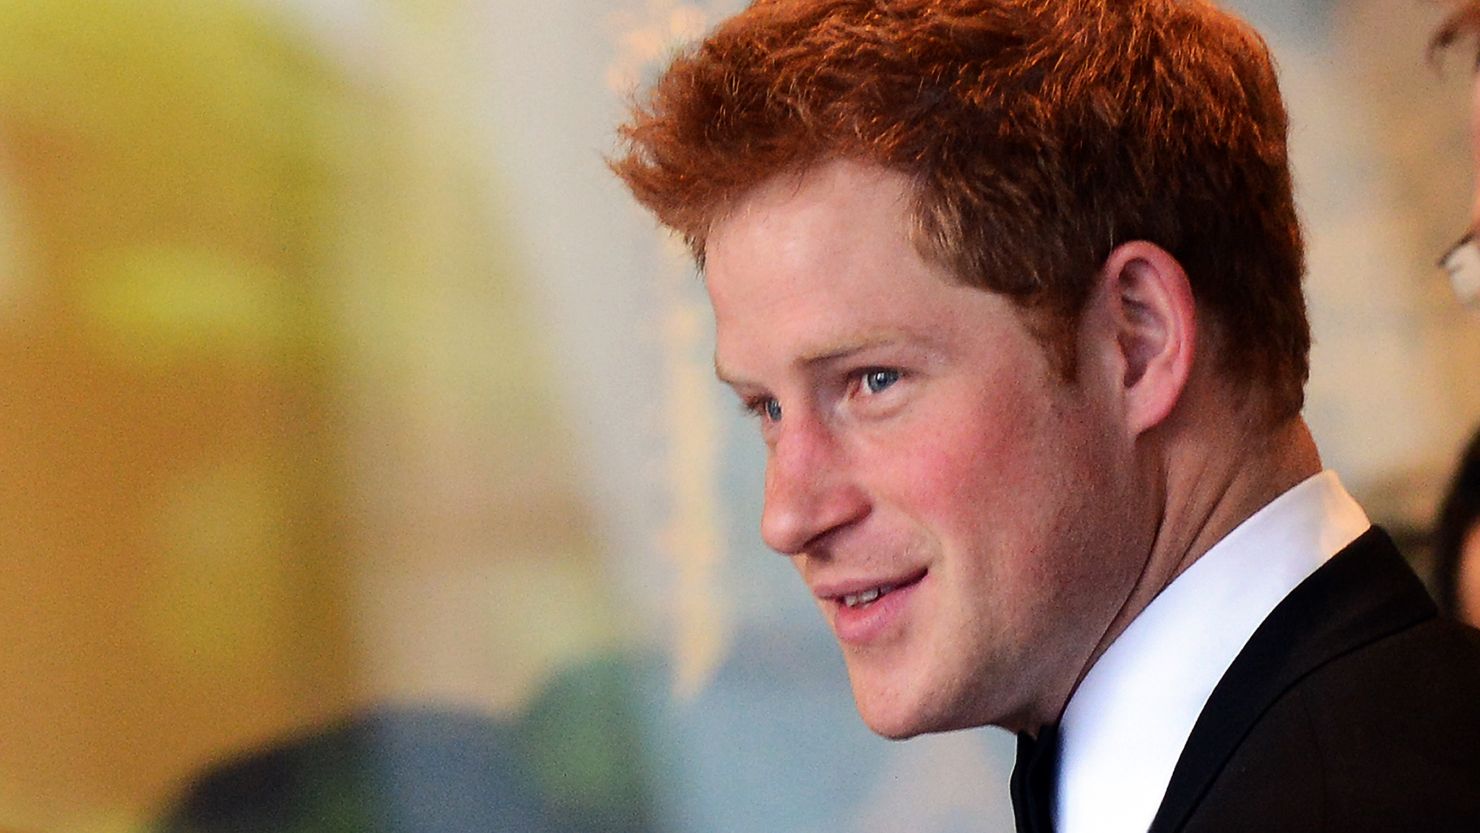 Britain's Prince Harry arrives at the Atlantic Council's 50th anniversary dinner in Washington on Monday.